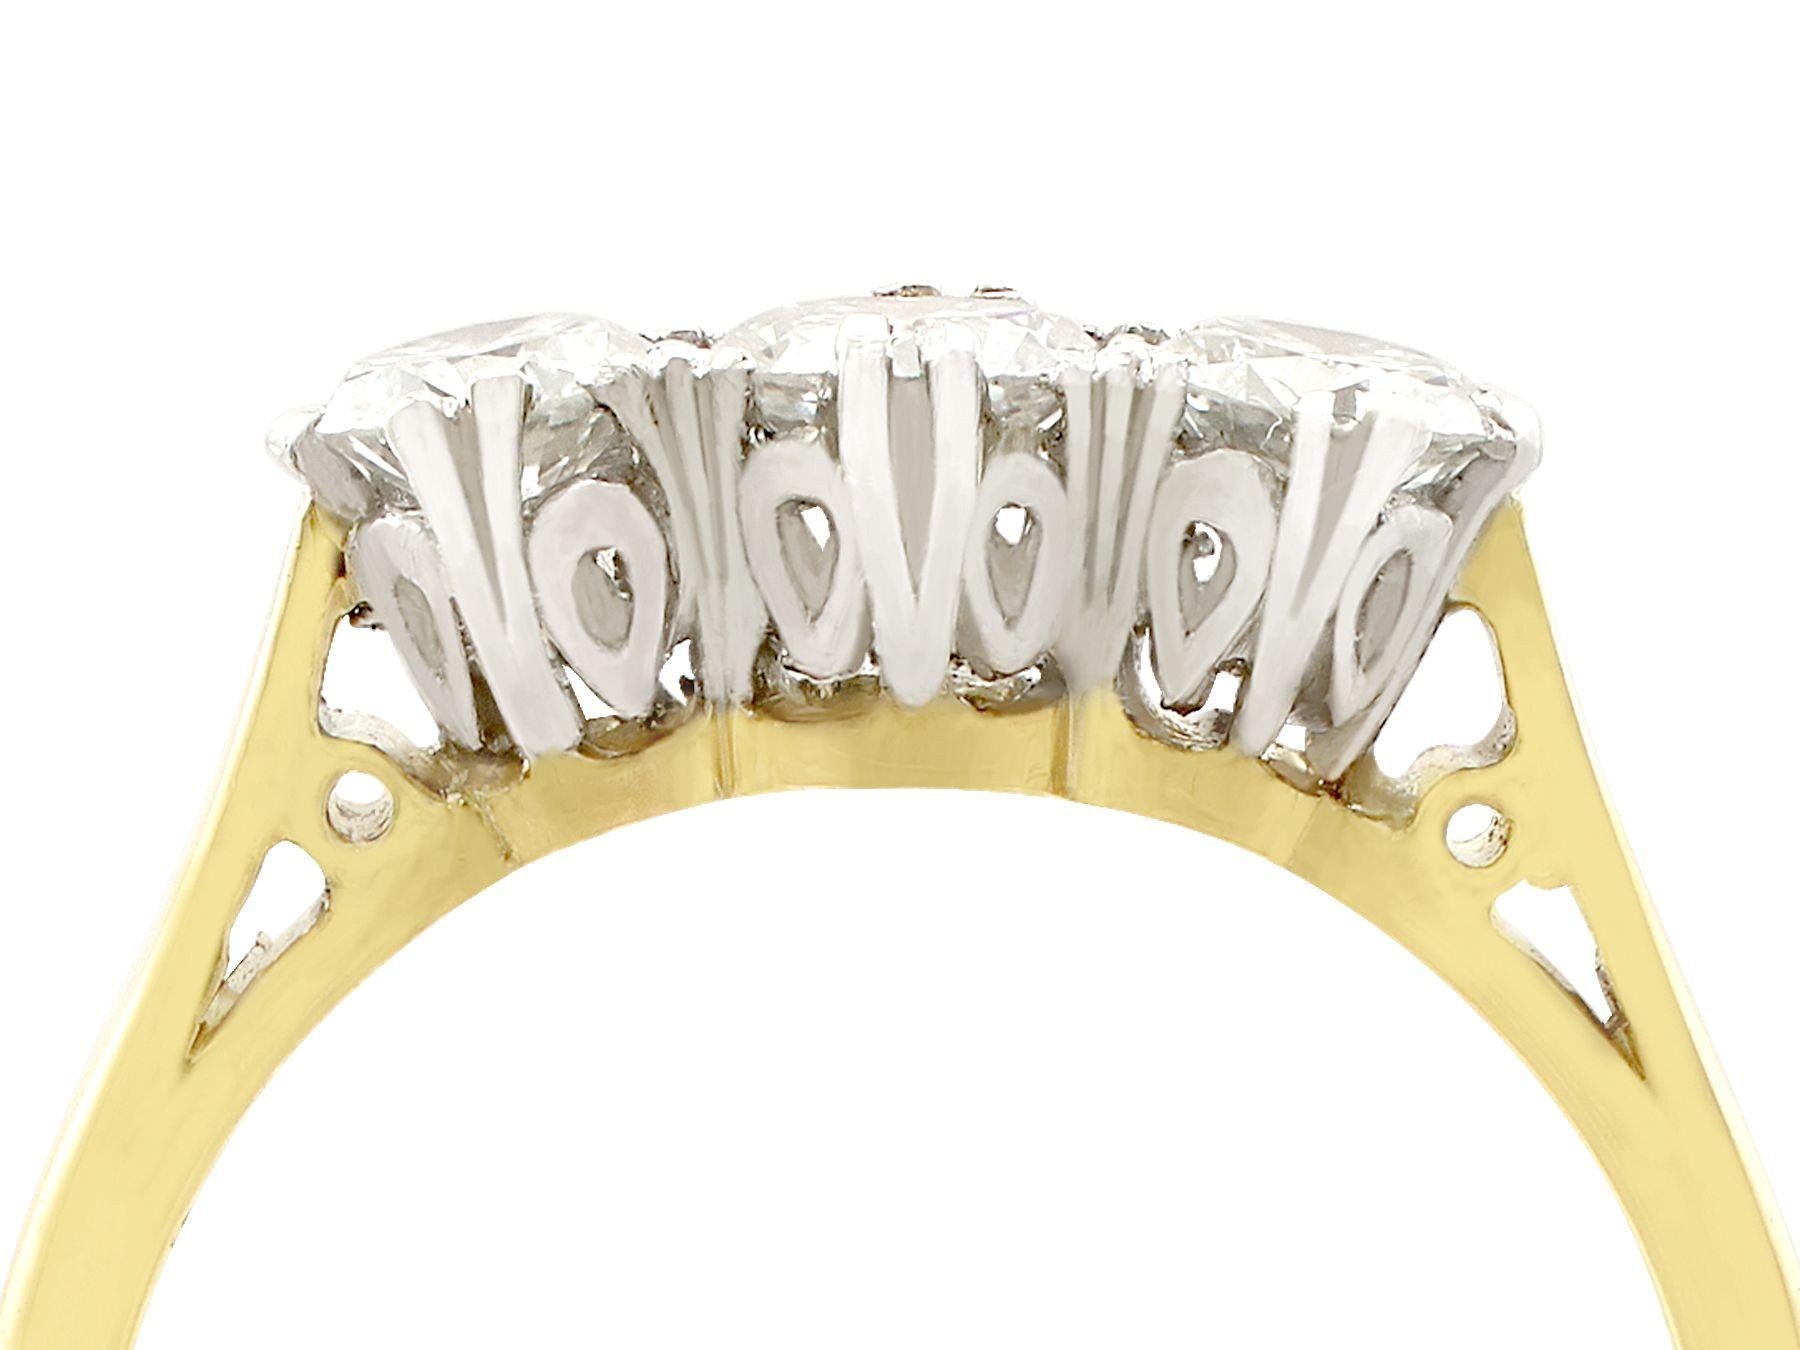 An impressive vintage 0.83 carat diamond and 18 karat yellow gold, platinum set trilogy style engagement ring; part of our diverse diamond jewelry and estate jewelry collections.

This fine and impressive three stone ring has been crafted in 18k